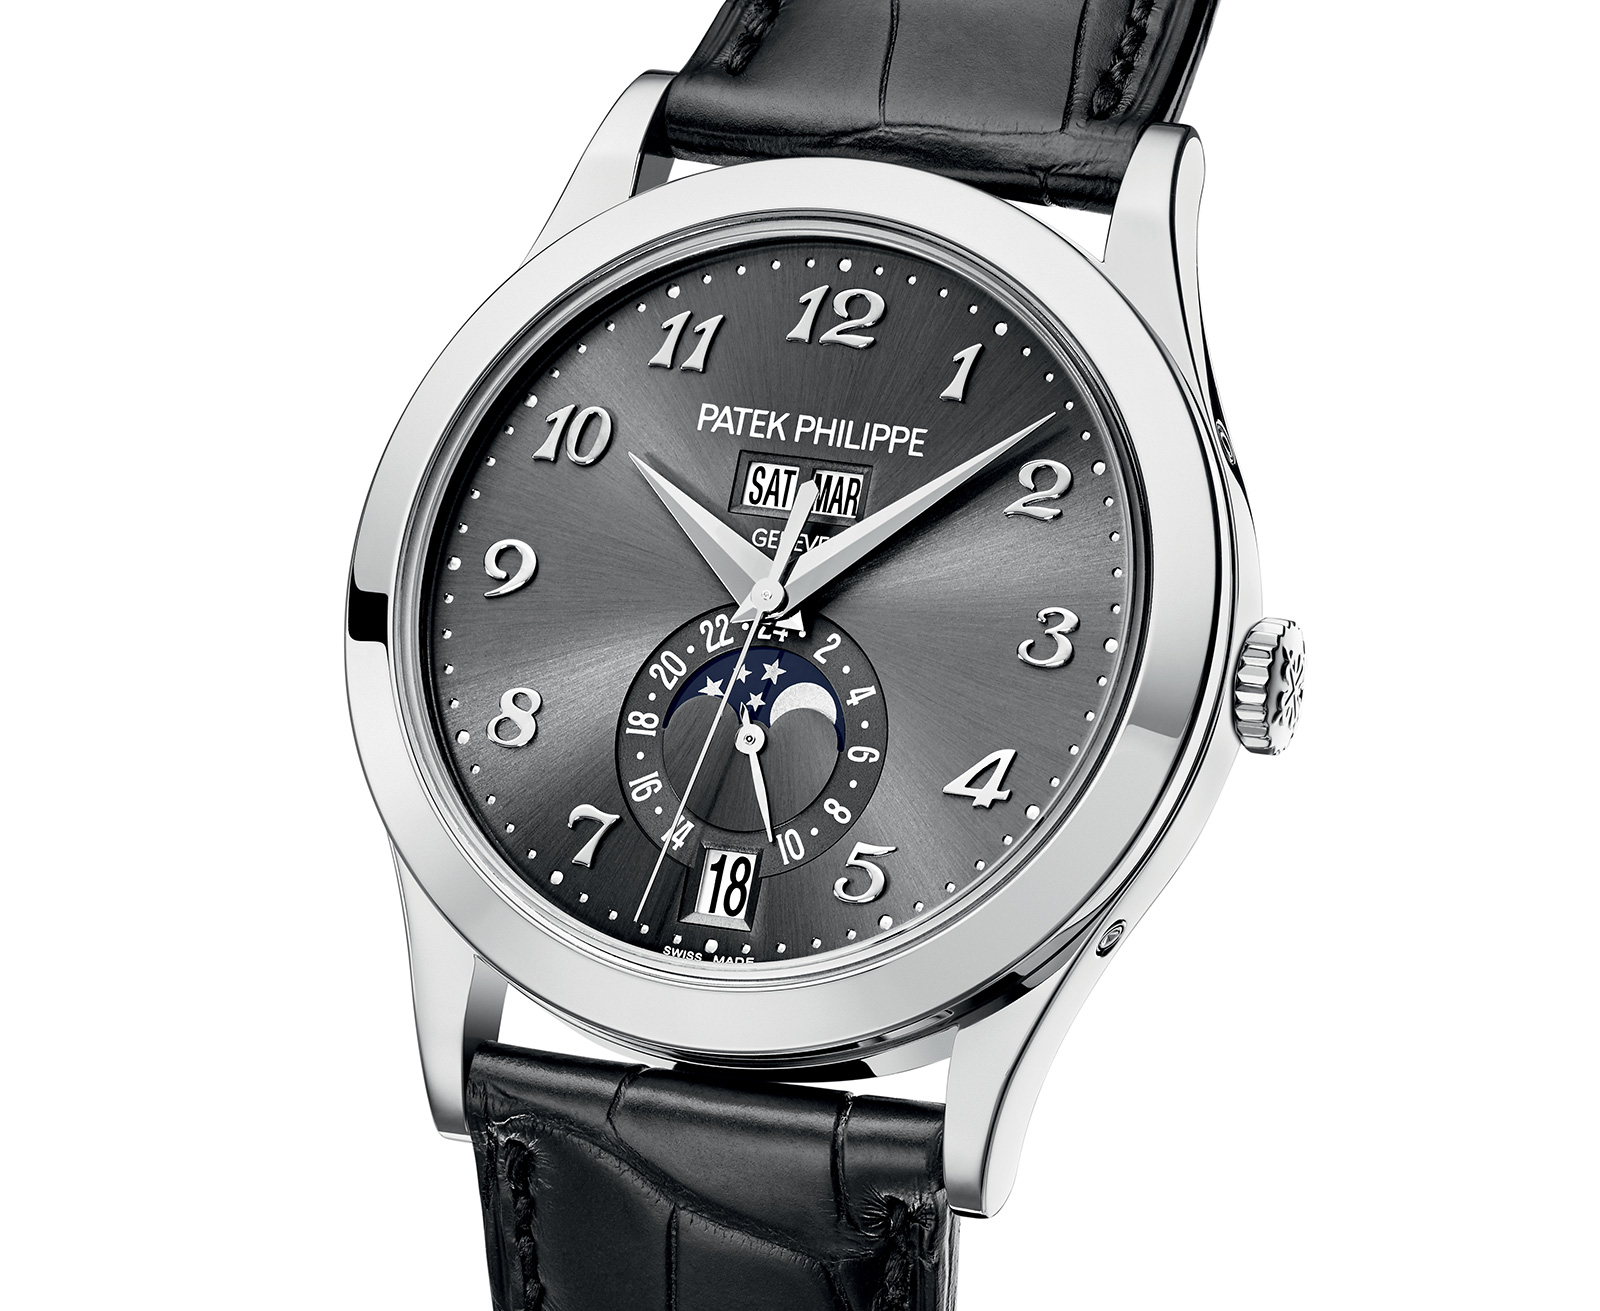 Patek Philippe Introduces the Annual Calendar Ref. 5396 with Breguet ...